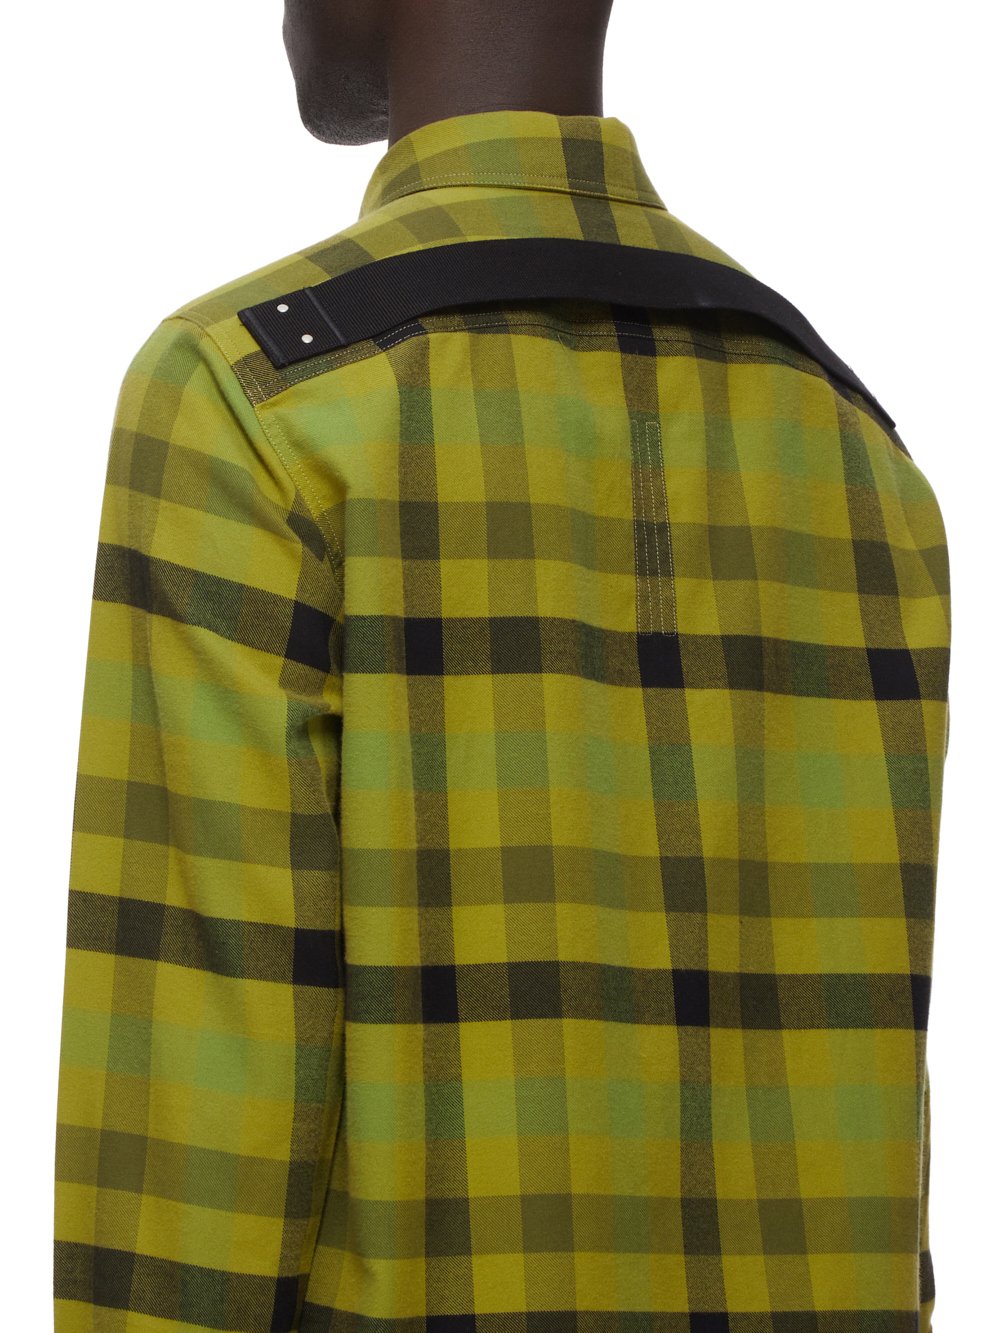 RICK OWENS FW23 LUXOR OUTERSHIRT IN ACID COTTON PLAID